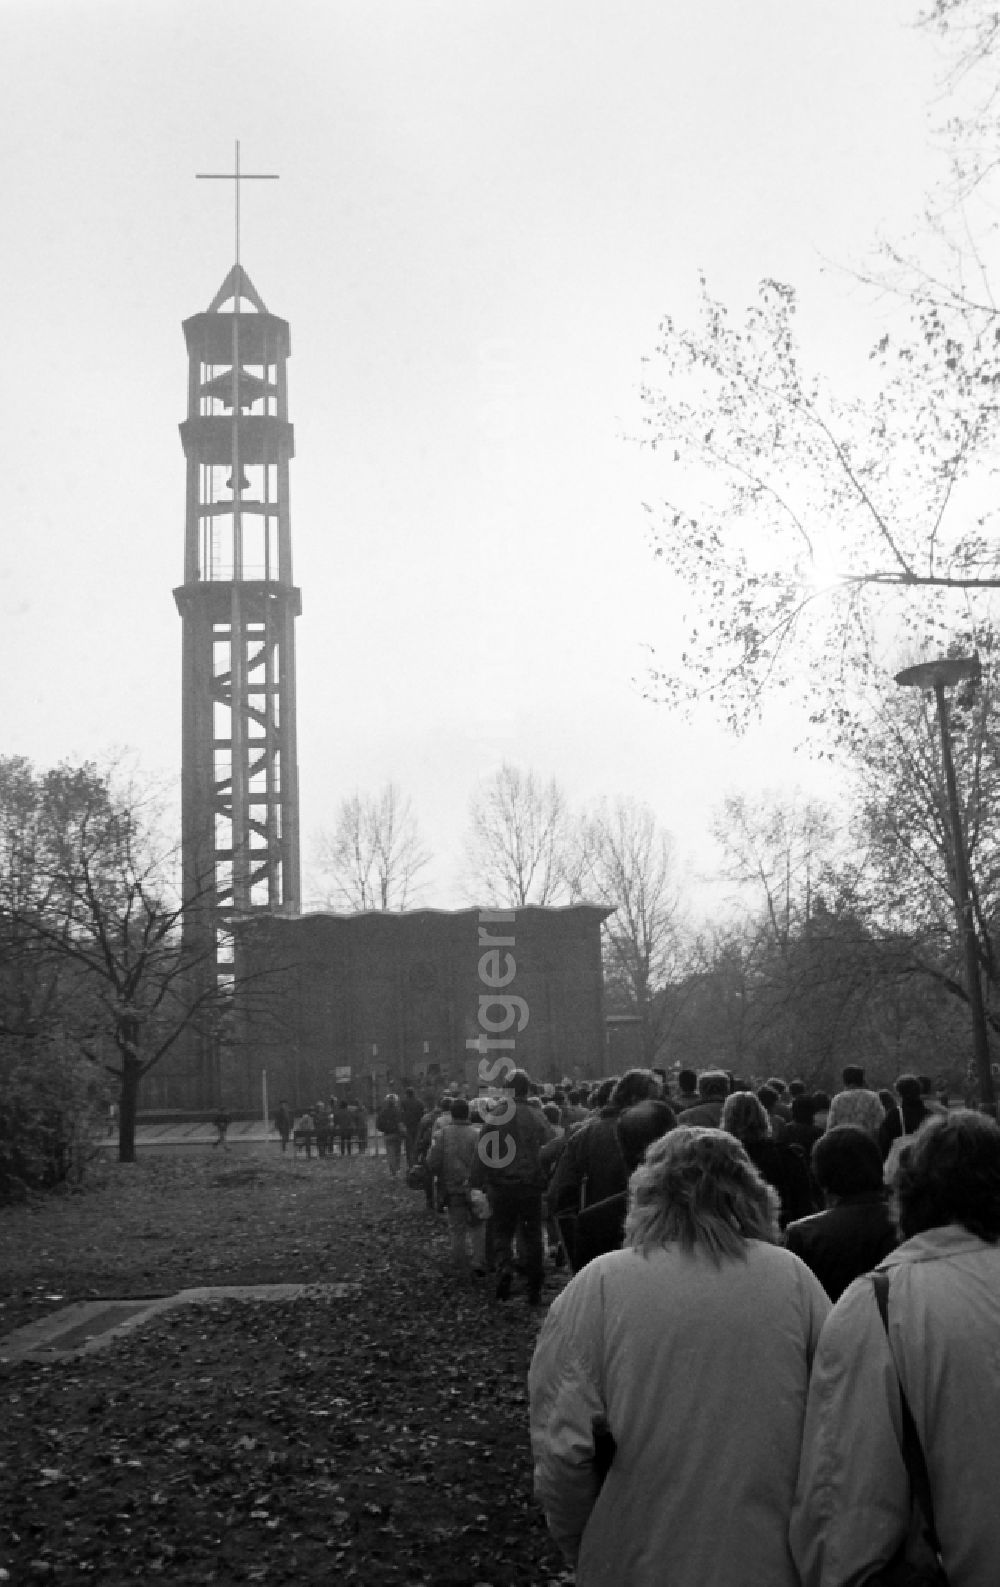 Berlin: People from the Westside and the Eastside are out and about in West Berlin shortly after the fall of the Berlin Wall, here at the Kaiser Friedrich Memorial Church in Berlin-Tiergarten